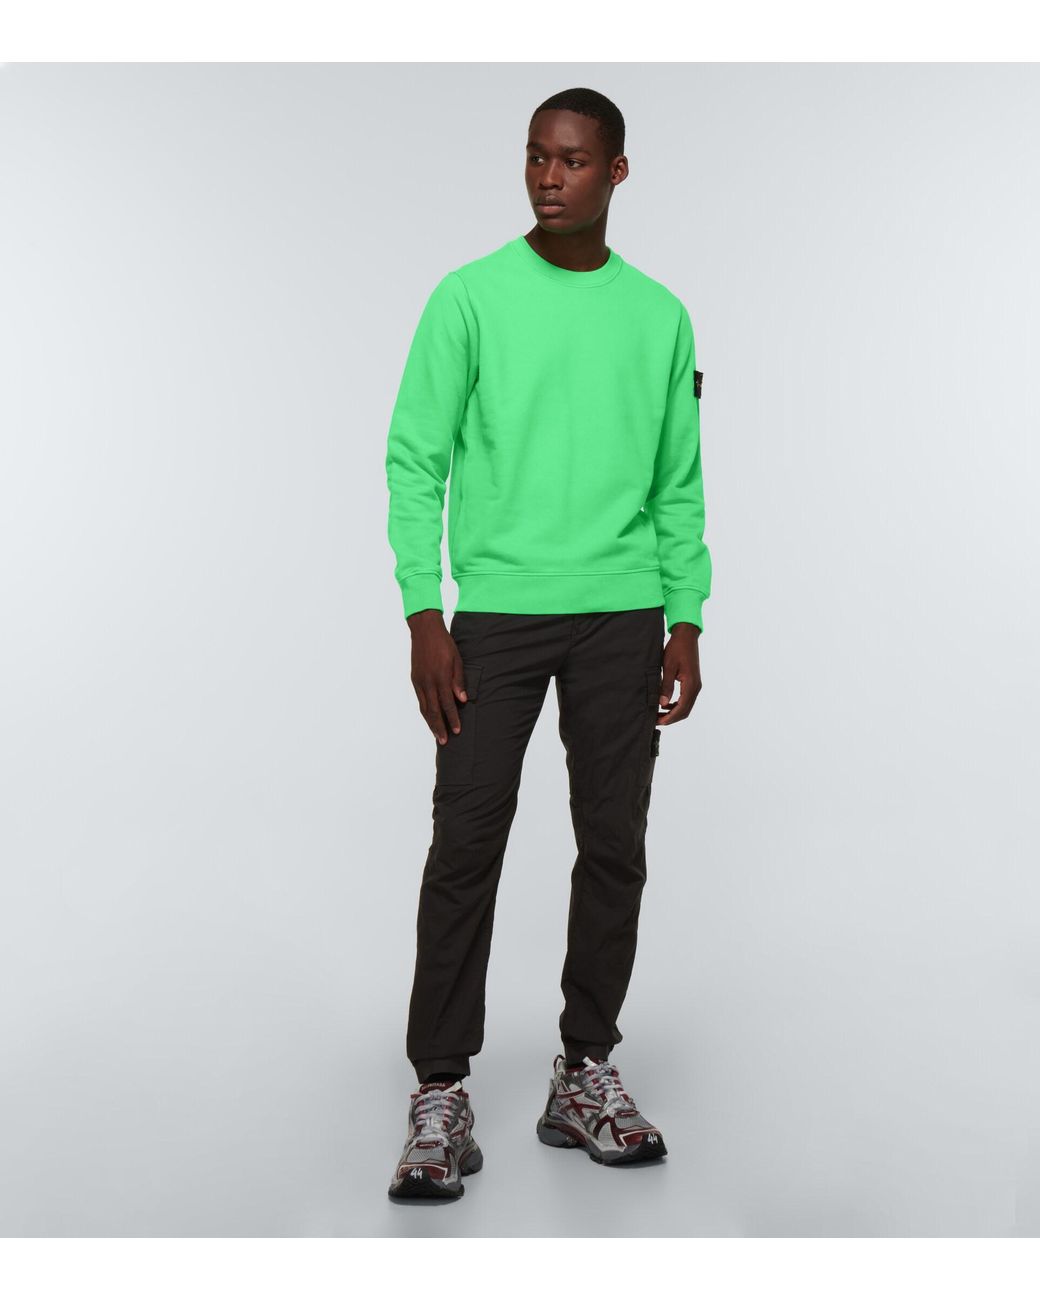 Stone Island Cotton Sweater in Green for Men | Lyst